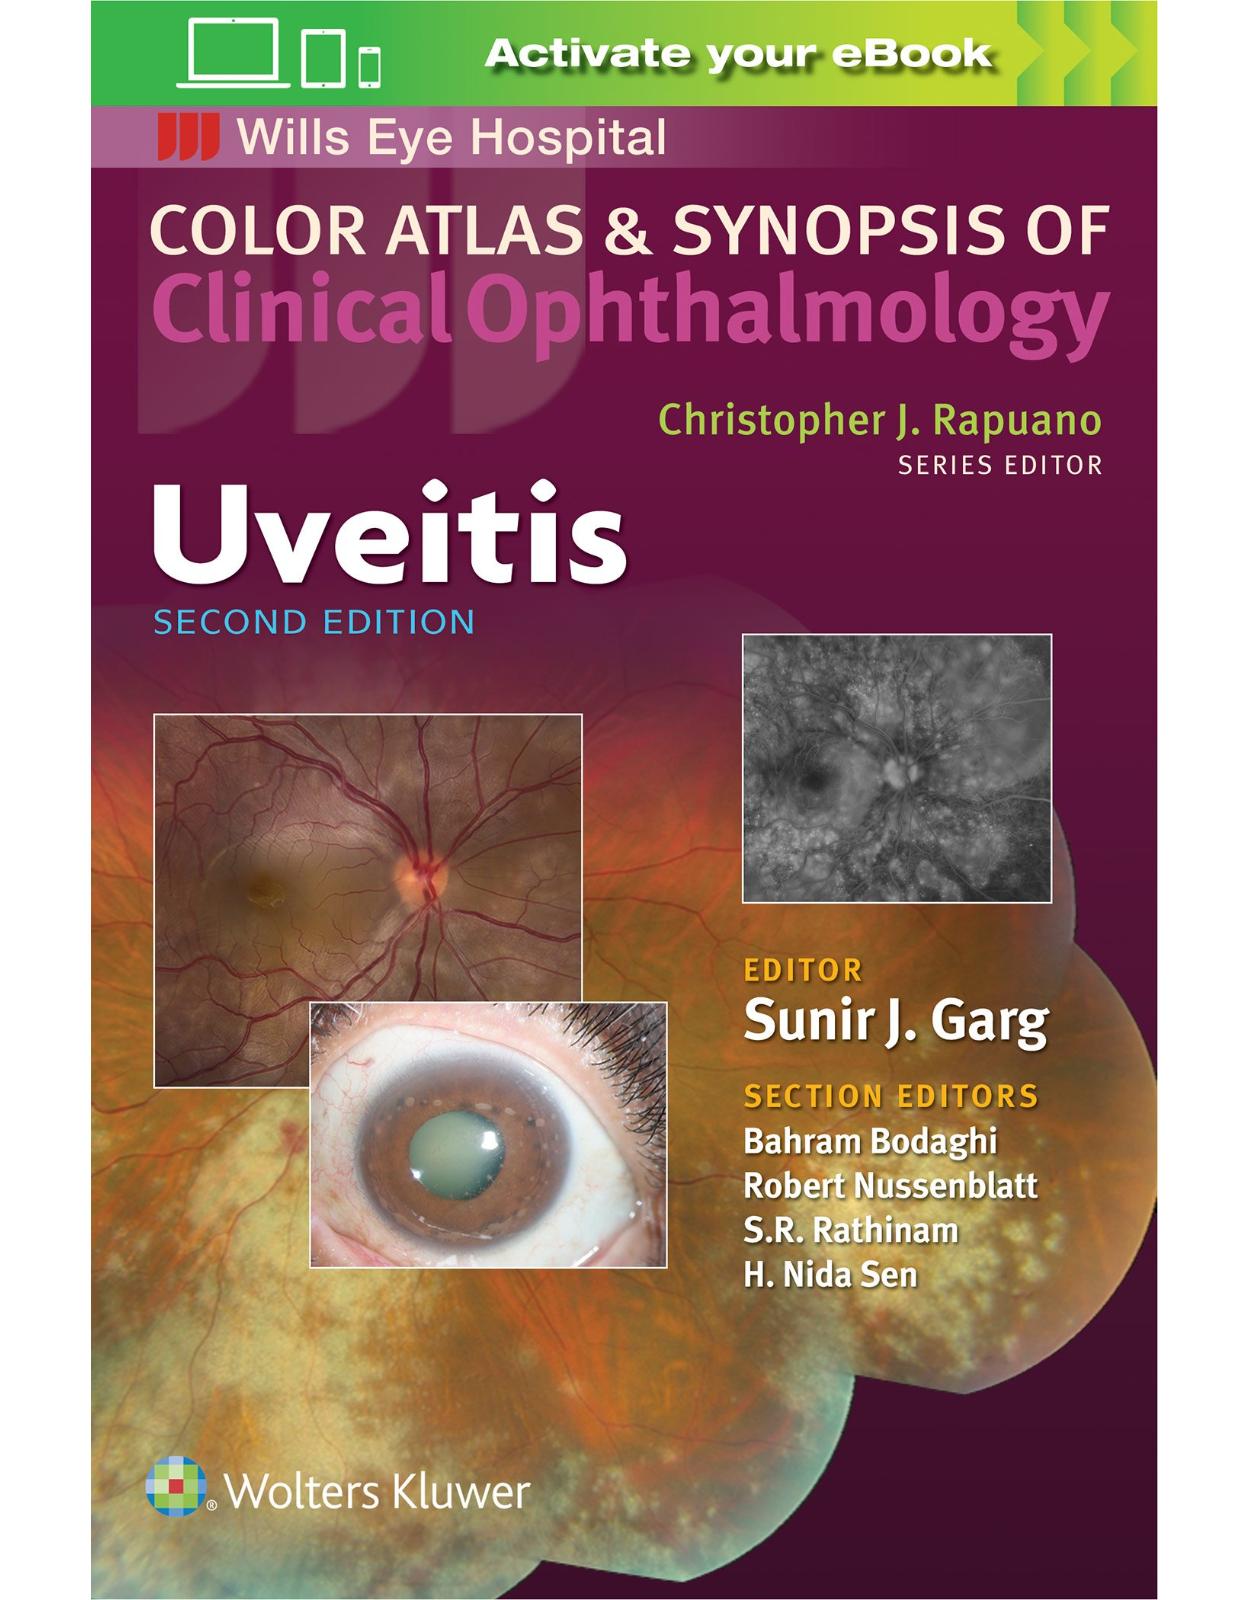 Uveitis (Color Atlas & Synopsis of Clinical Ophthalmology)